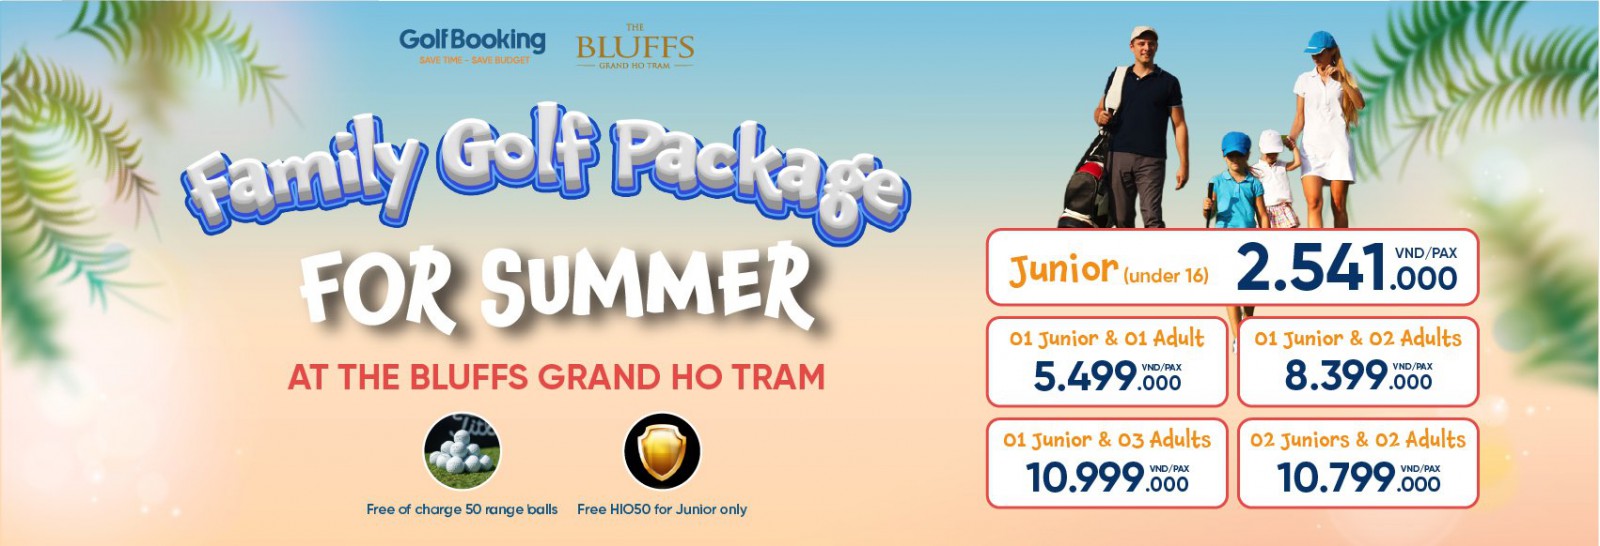 Family Golf Package for Summer At The Bluffs Grand Ho Tram